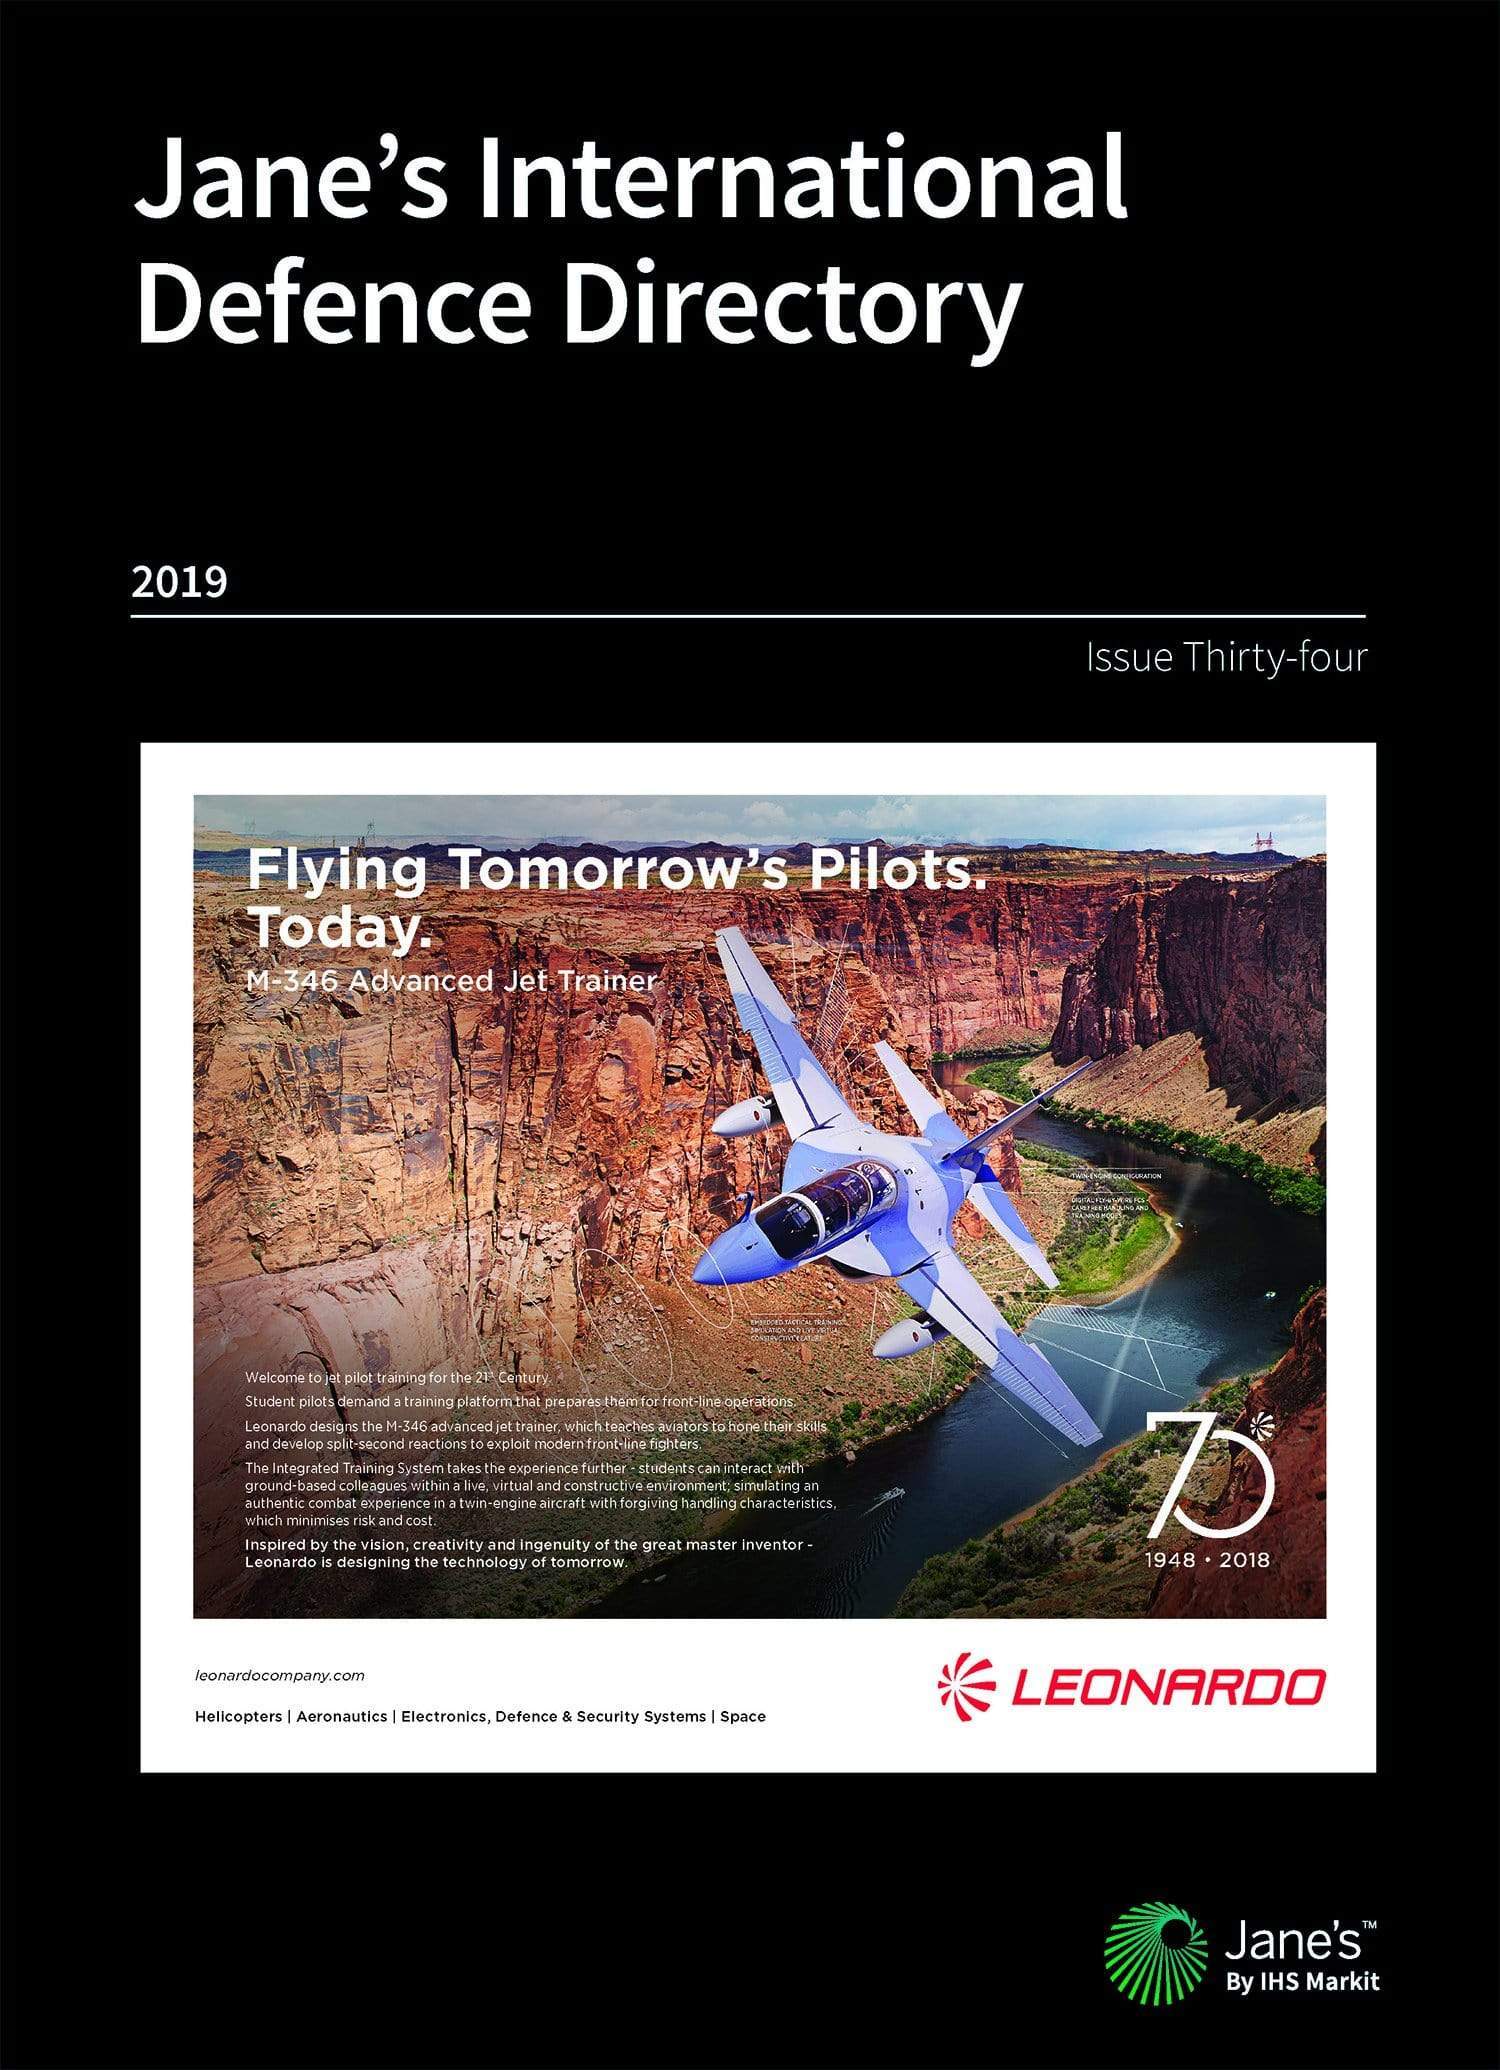 Janes International Defence Directory Yearbook, 2018/2019 Edition